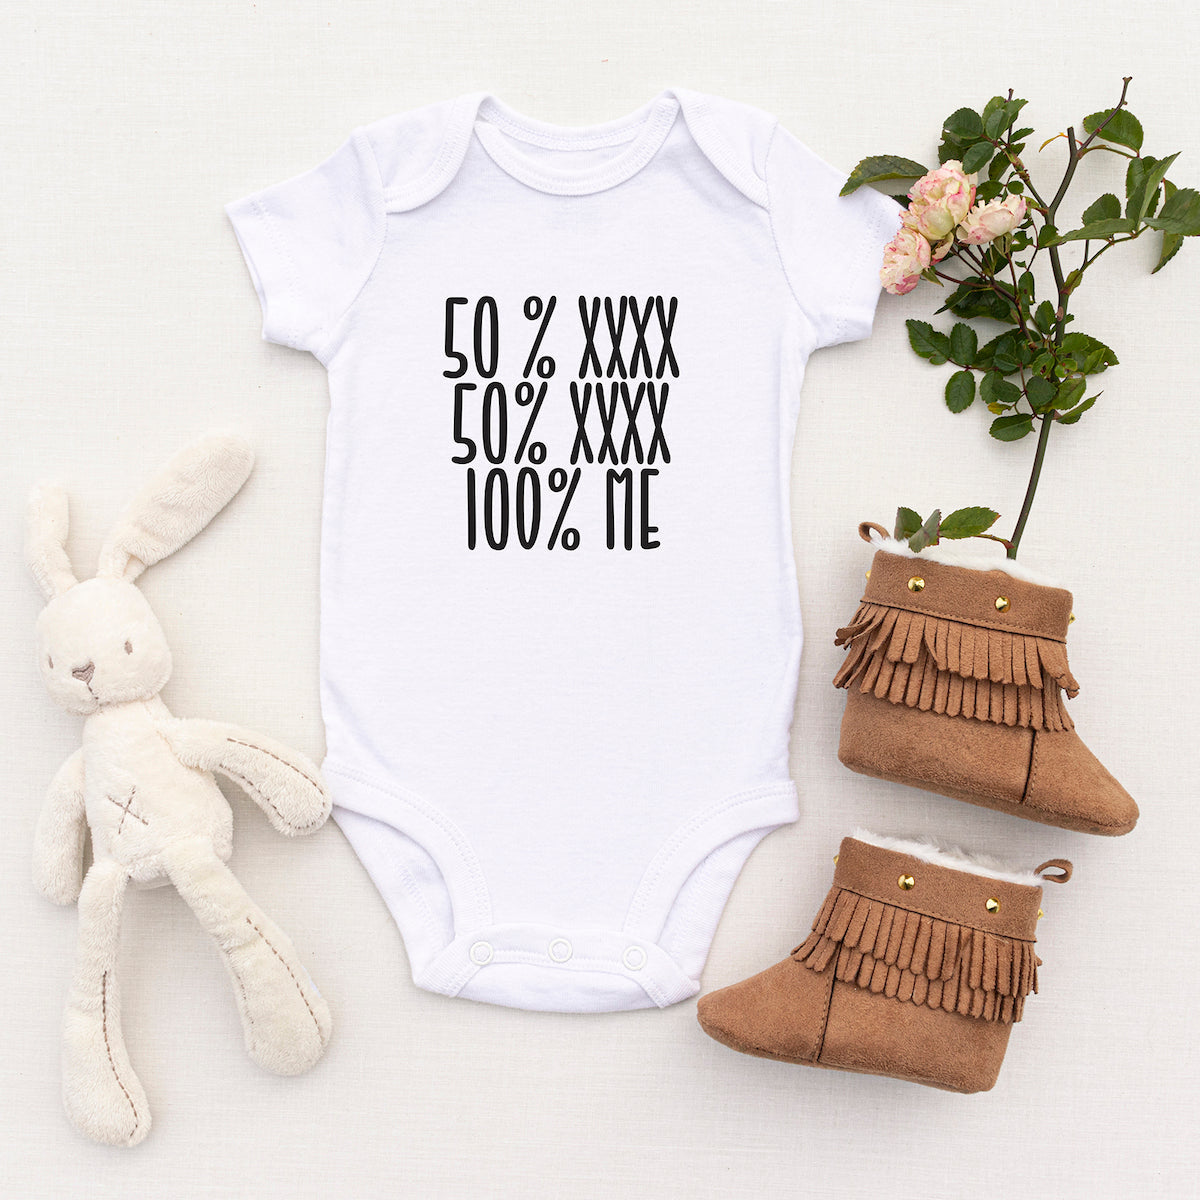 Personalised White Baby Body Suit Grow Vest - 50%